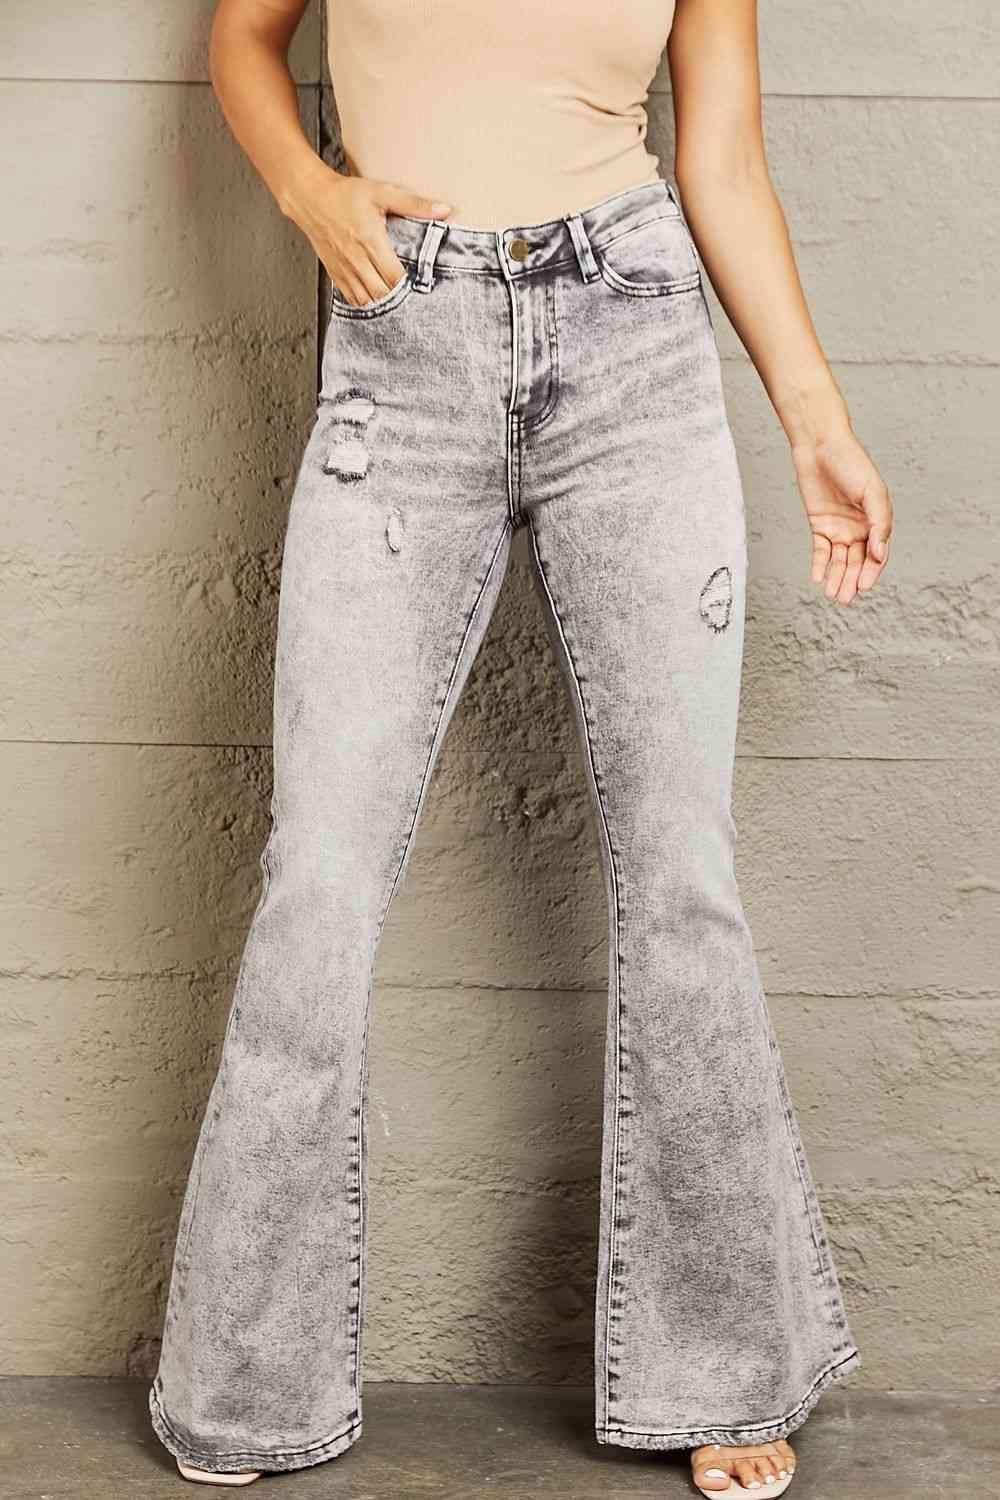 Fit And Flatters High Waisted Acid Wash Flare Jeans - MXSTUDIO.COM